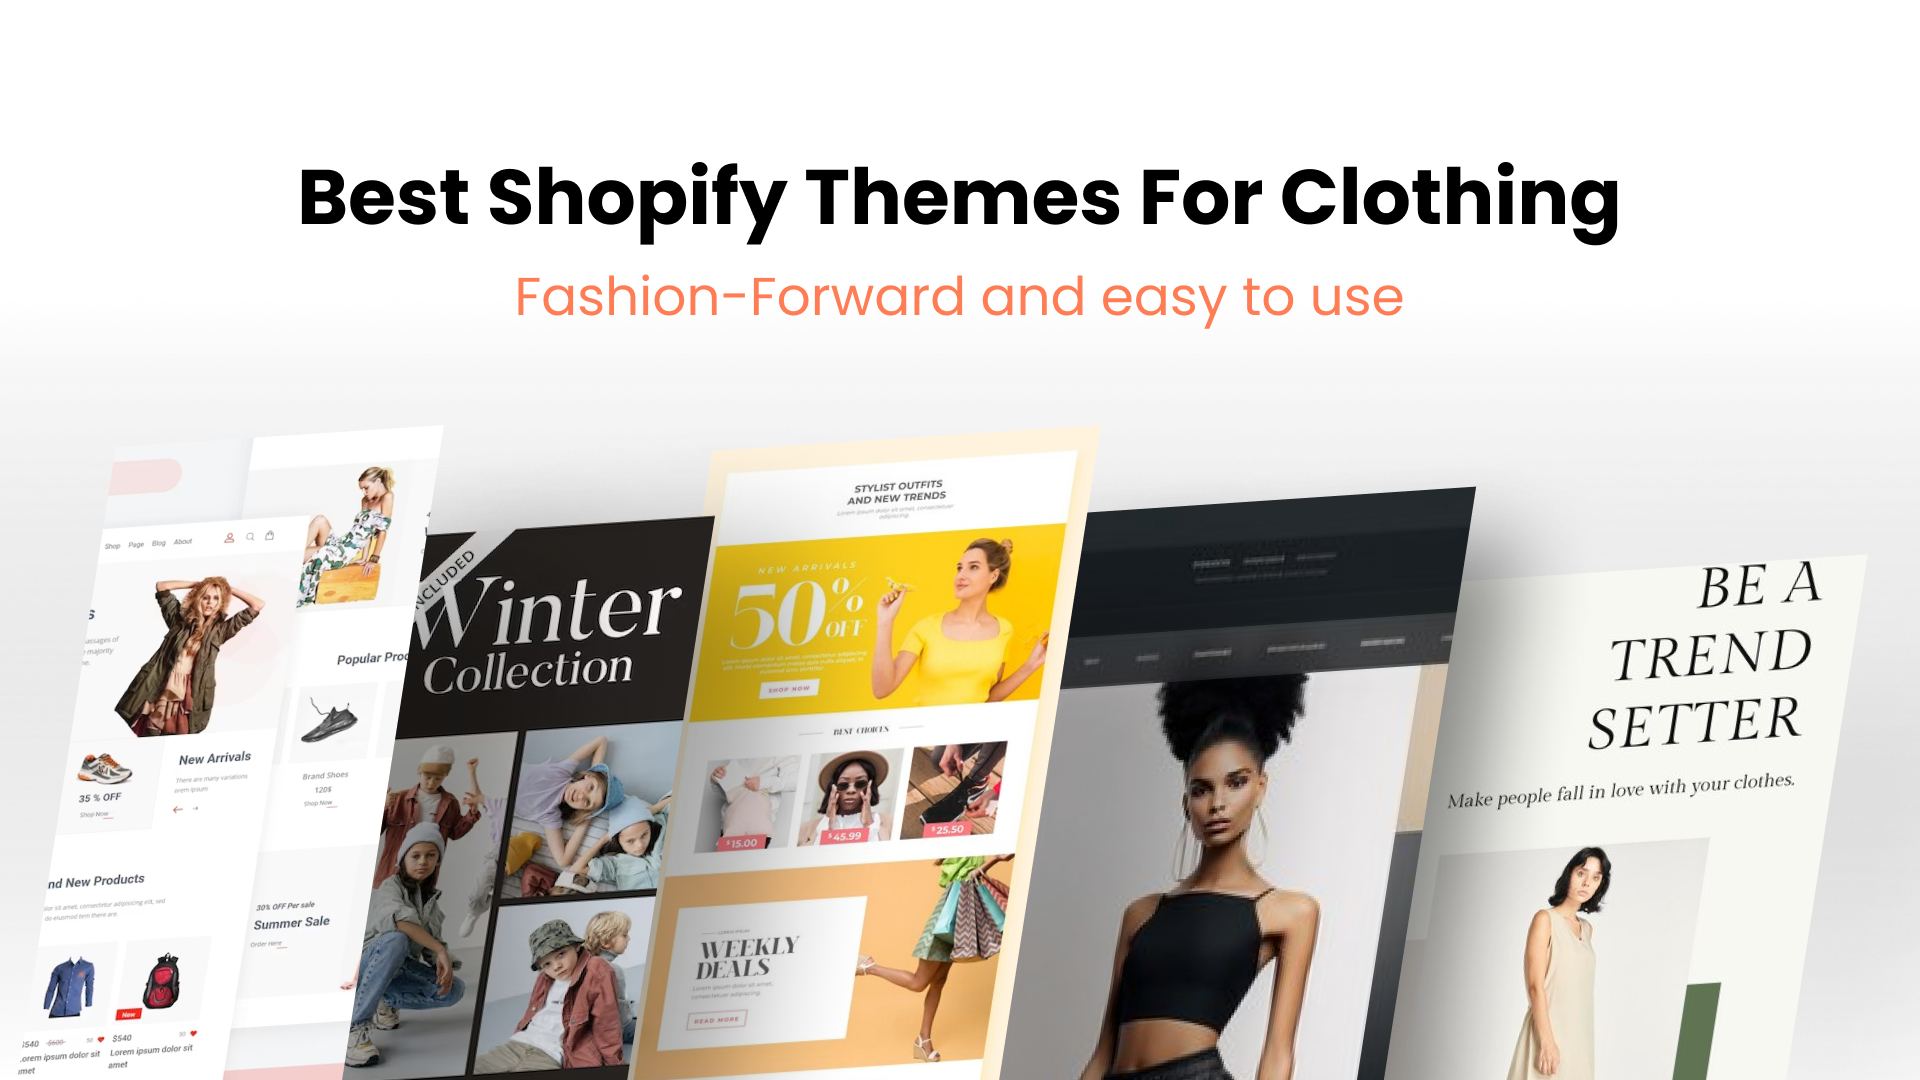 Best Shopify Themes for Clothing: Fashion-Forward and Easy to Use